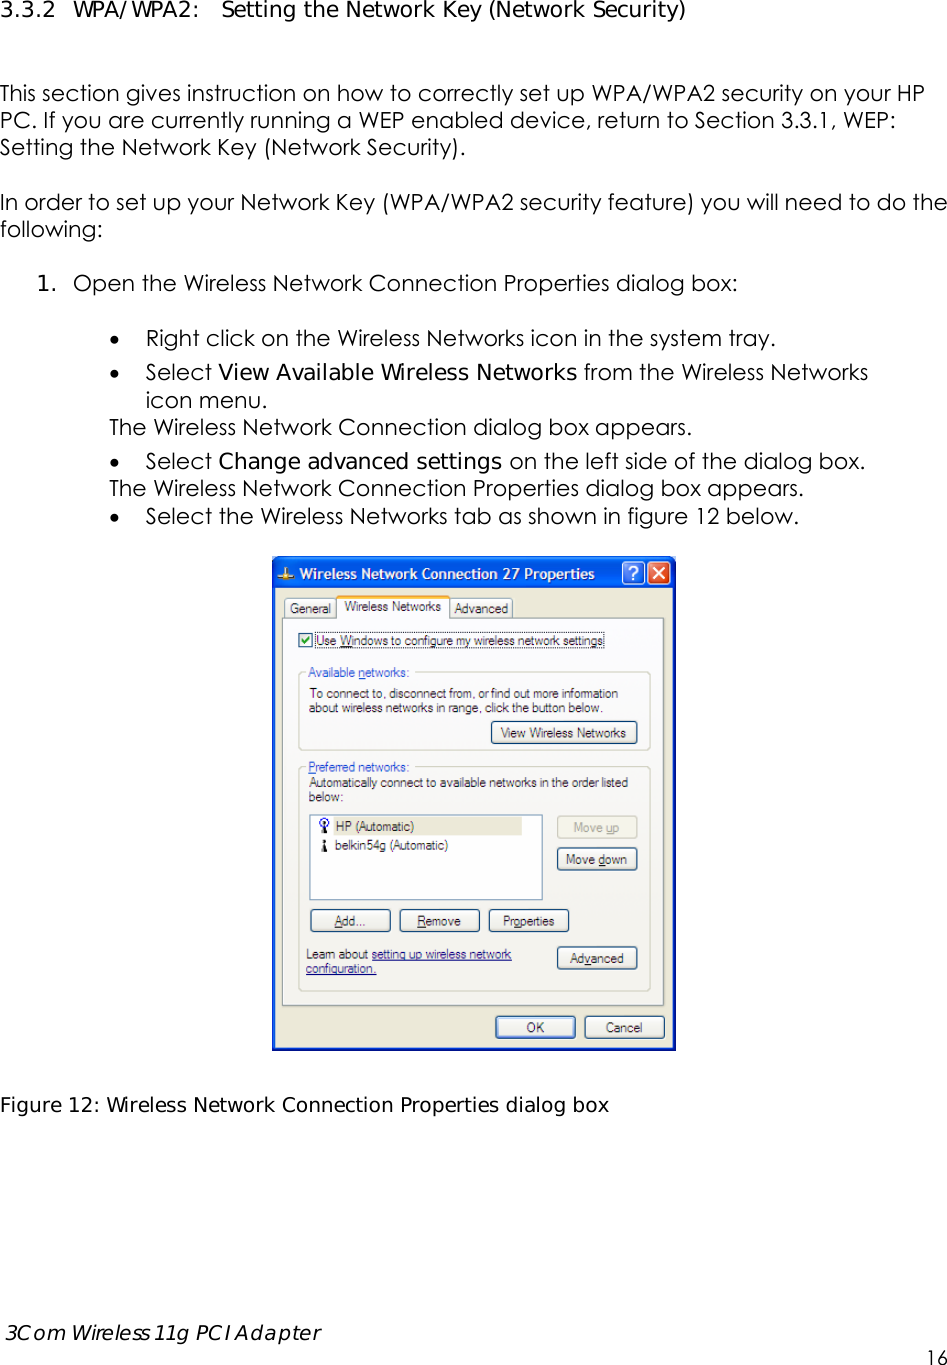      3Com Wireless 11g PCI Adapter     16  3.3.2 WPA/WPA2:  Setting the Network Key (Network Security)   This section gives instruction on how to correctly set up WPA/WPA2 security on your HP PC. If you are currently running a WEP enabled device, return to Section 3.3.1, WEP: Setting the Network Key (Network Security).    In order to set up your Network Key (WPA/WPA2 security feature) you will need to do the following:  1. Open the Wireless Network Connection Properties dialog box:   Right click on the Wireless Networks icon in the system tray.  Select View Available Wireless Networks from the Wireless Networks   icon menu. The Wireless Network Connection dialog box appears.  Select Change advanced settings on the left side of the dialog box. The Wireless Network Connection Properties dialog box appears.  Select the Wireless Networks tab as shown in figure 12 below.    Figure 12: Wireless Network Connection Properties dialog box 